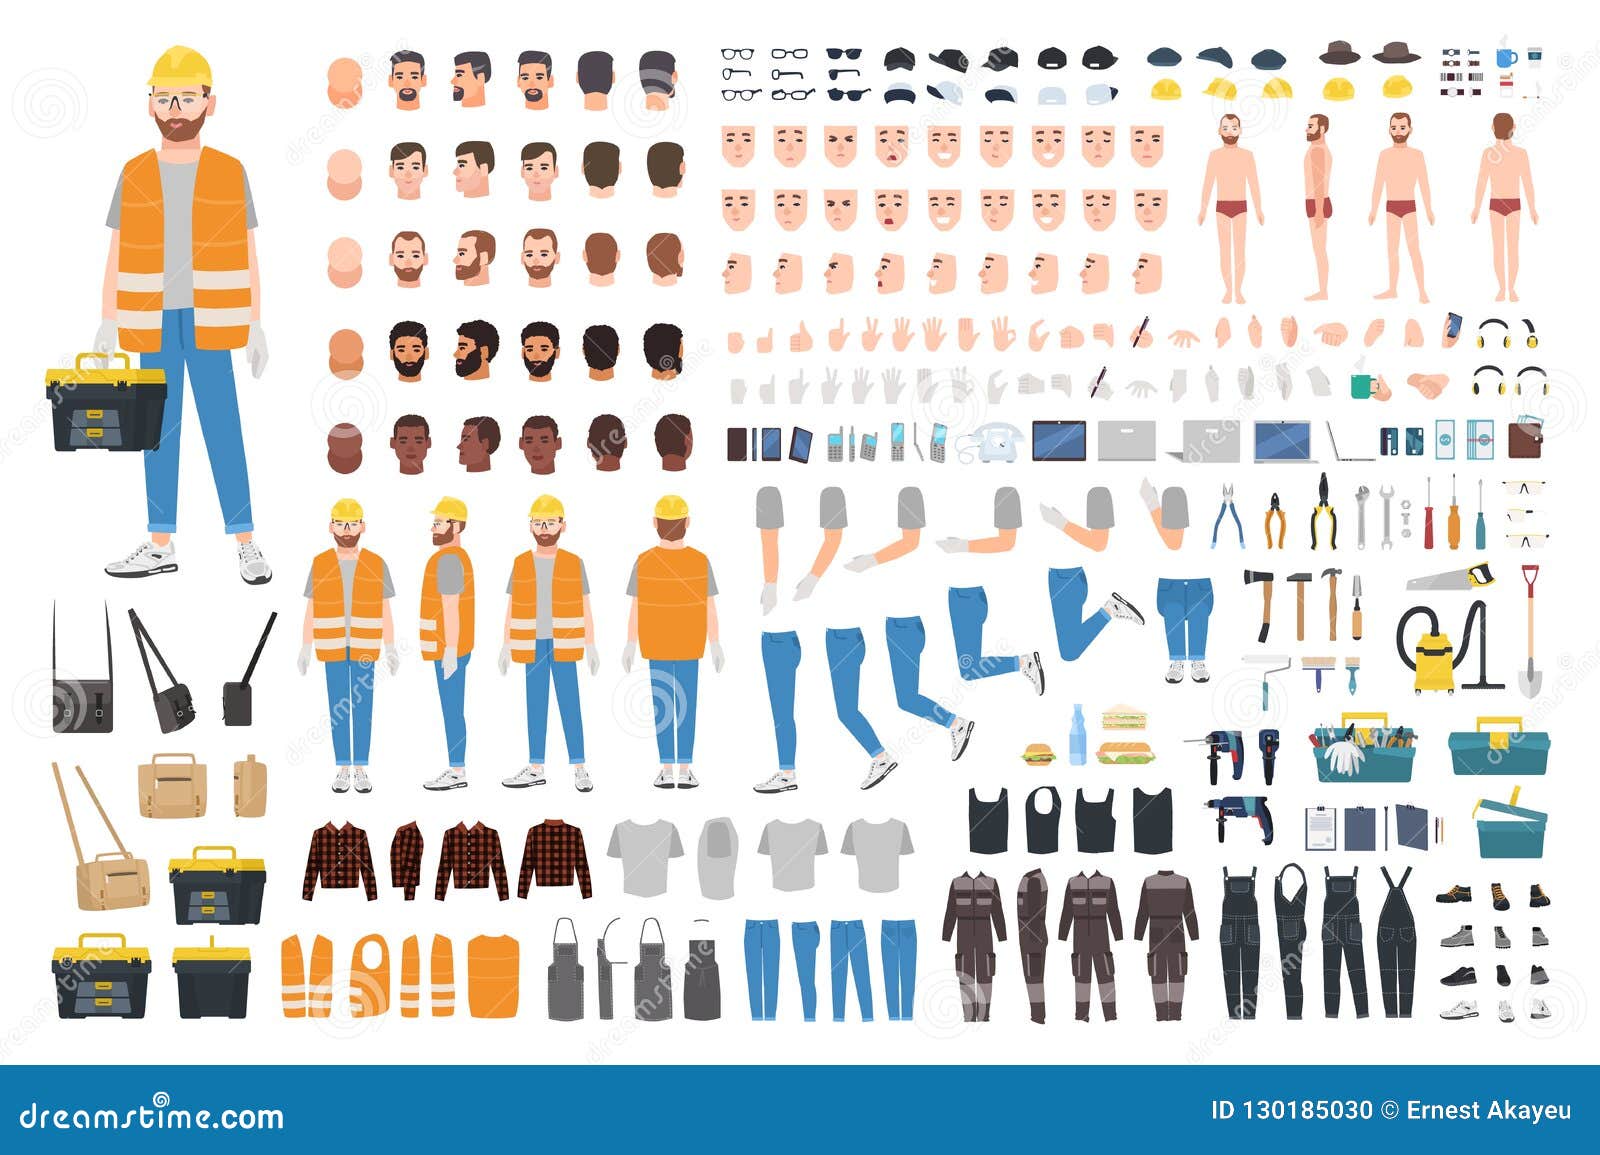 worker or repairer diy kit. collection of male cartoon character body parts, facial expressions, gestures, clothes